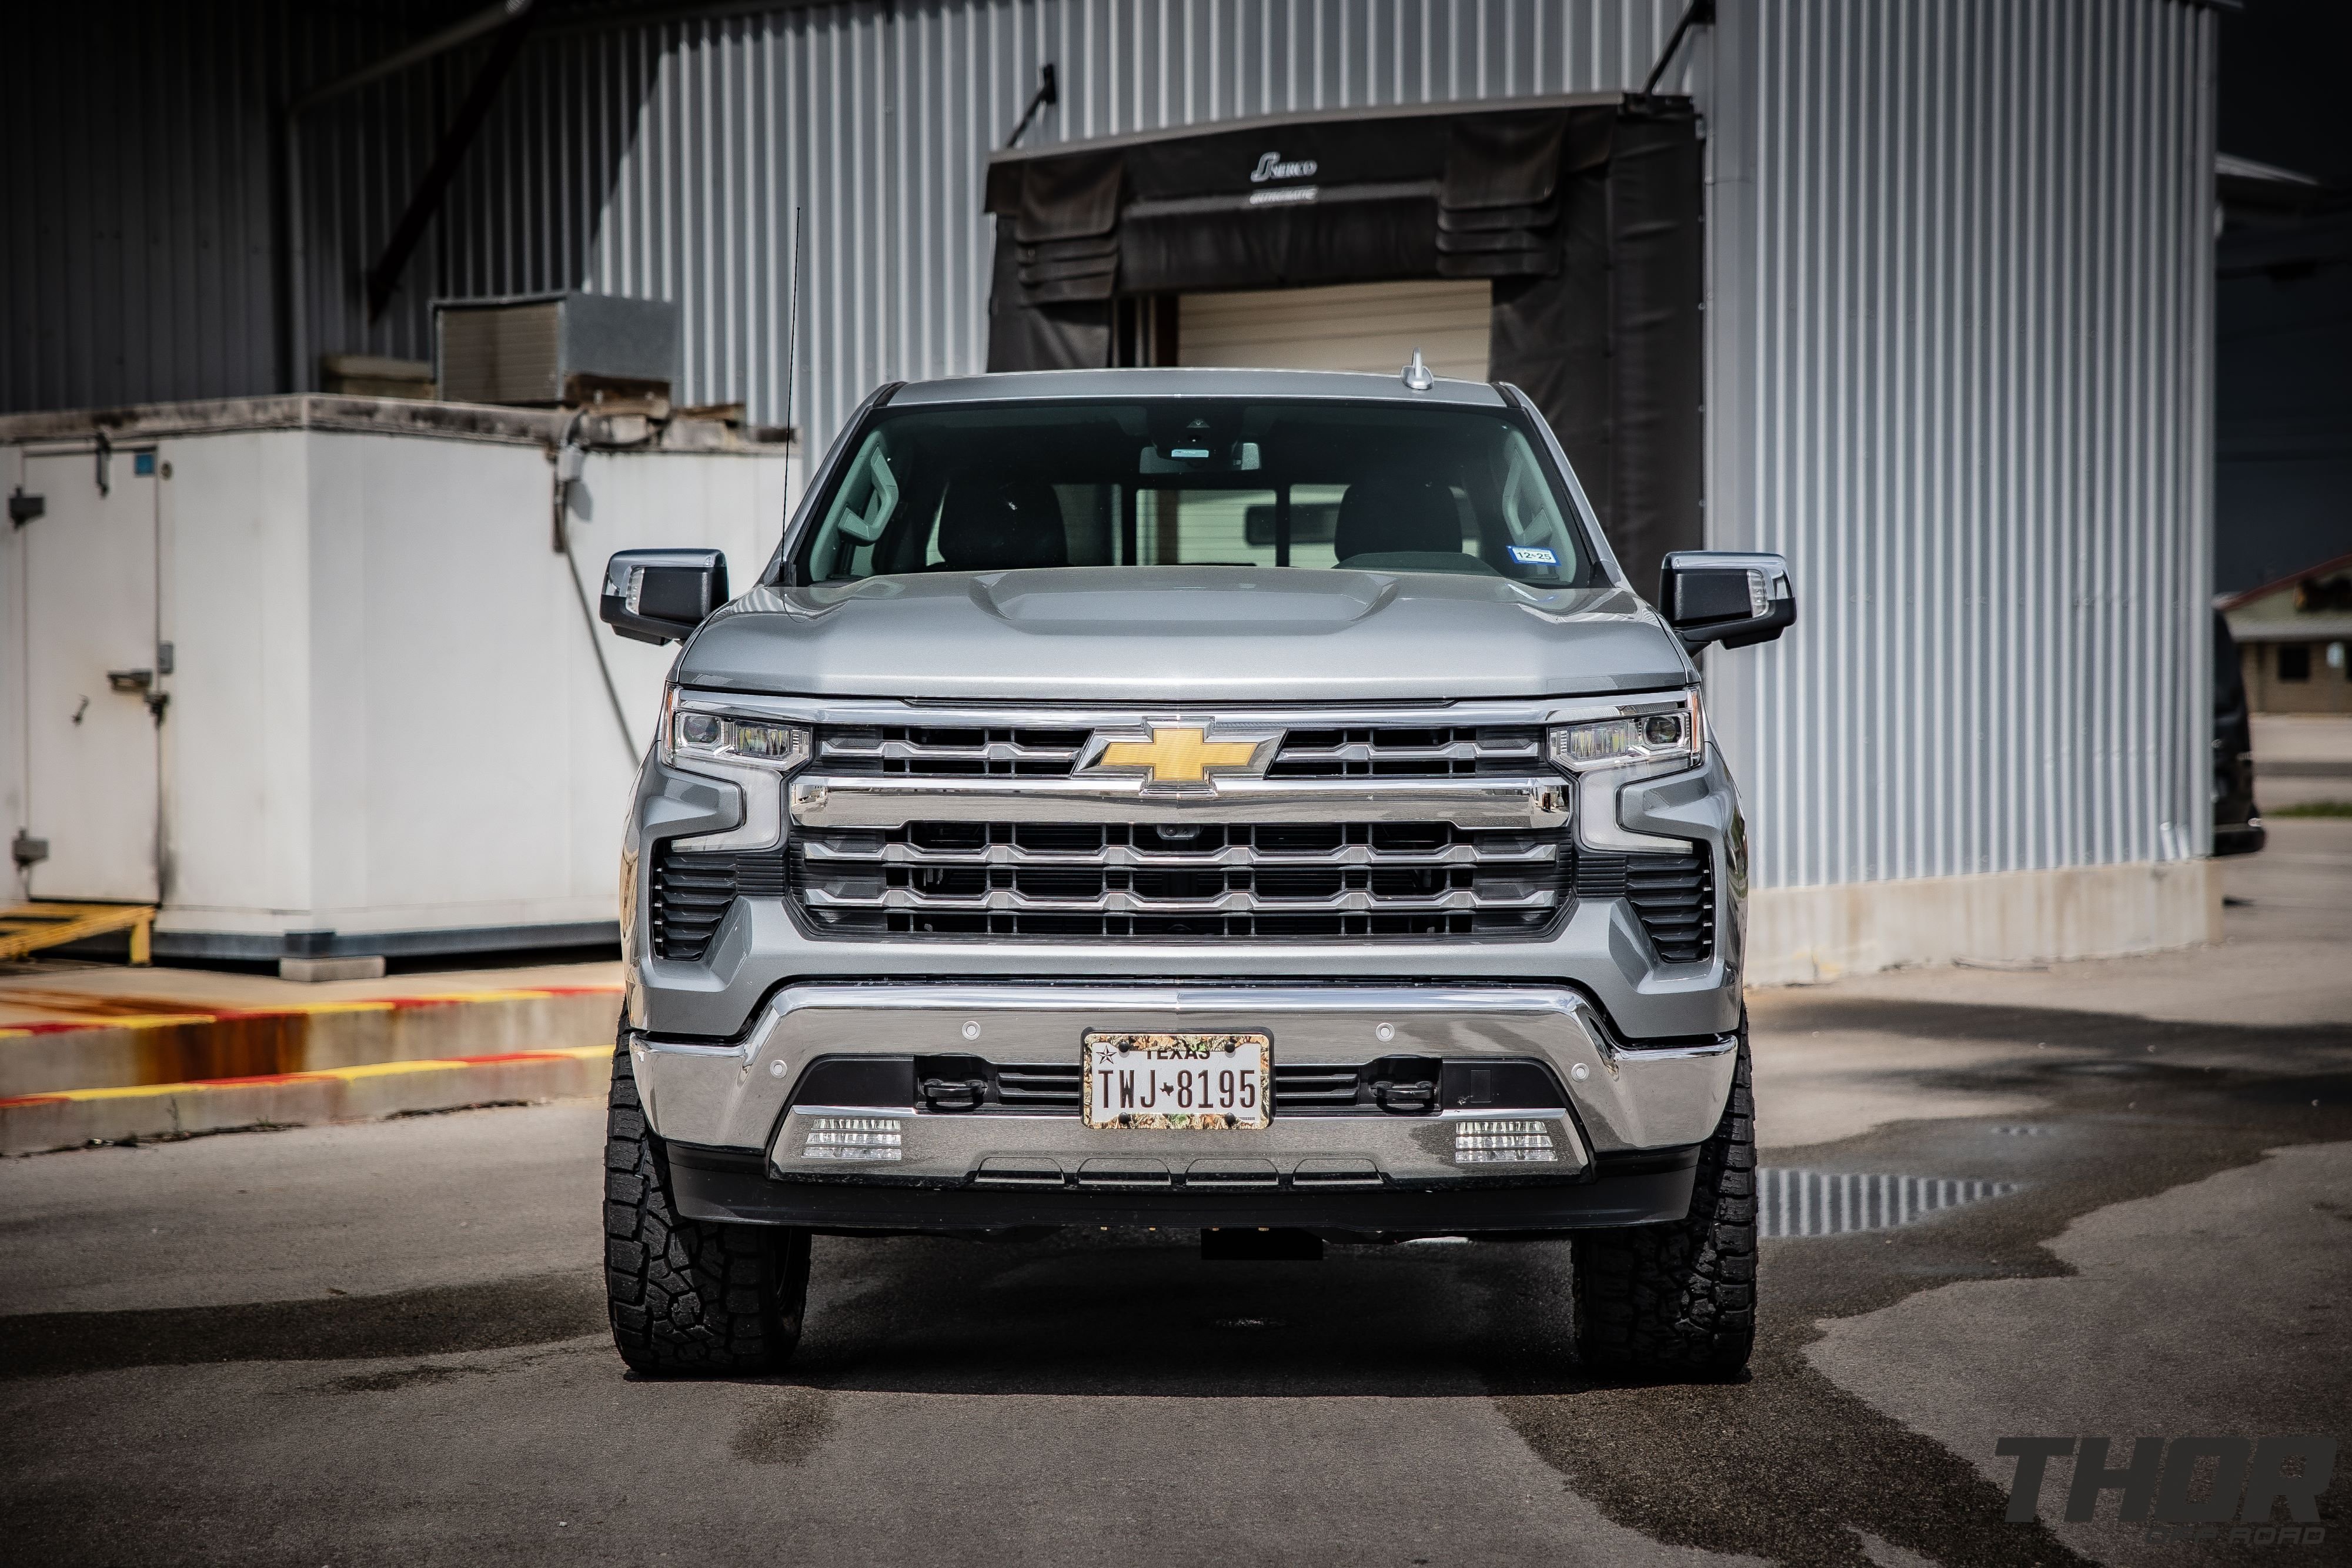 2024 Chevrolet Silverado 1500 LTZ in Silver with BDS 4" Lift Kit, Fuel Off-Road Rebar 6 20x9" Wheels, 33x12.50R20 Toyo Open Country A/T III Tires